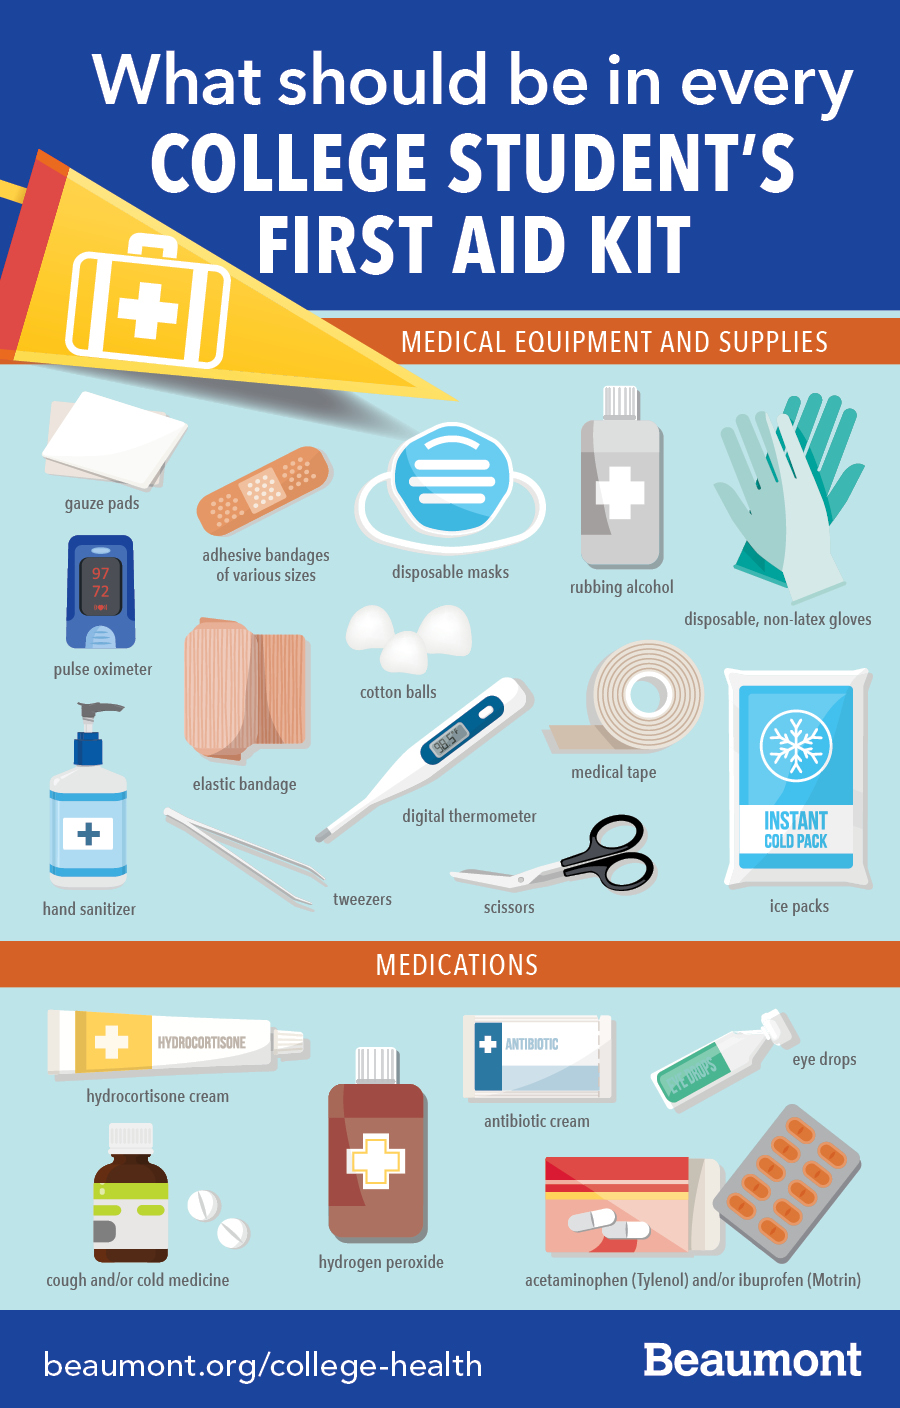 https://www.beaumont.org/images/default-source/news/college-first-aid.jpg?sfvrsn=e6e569f9_0